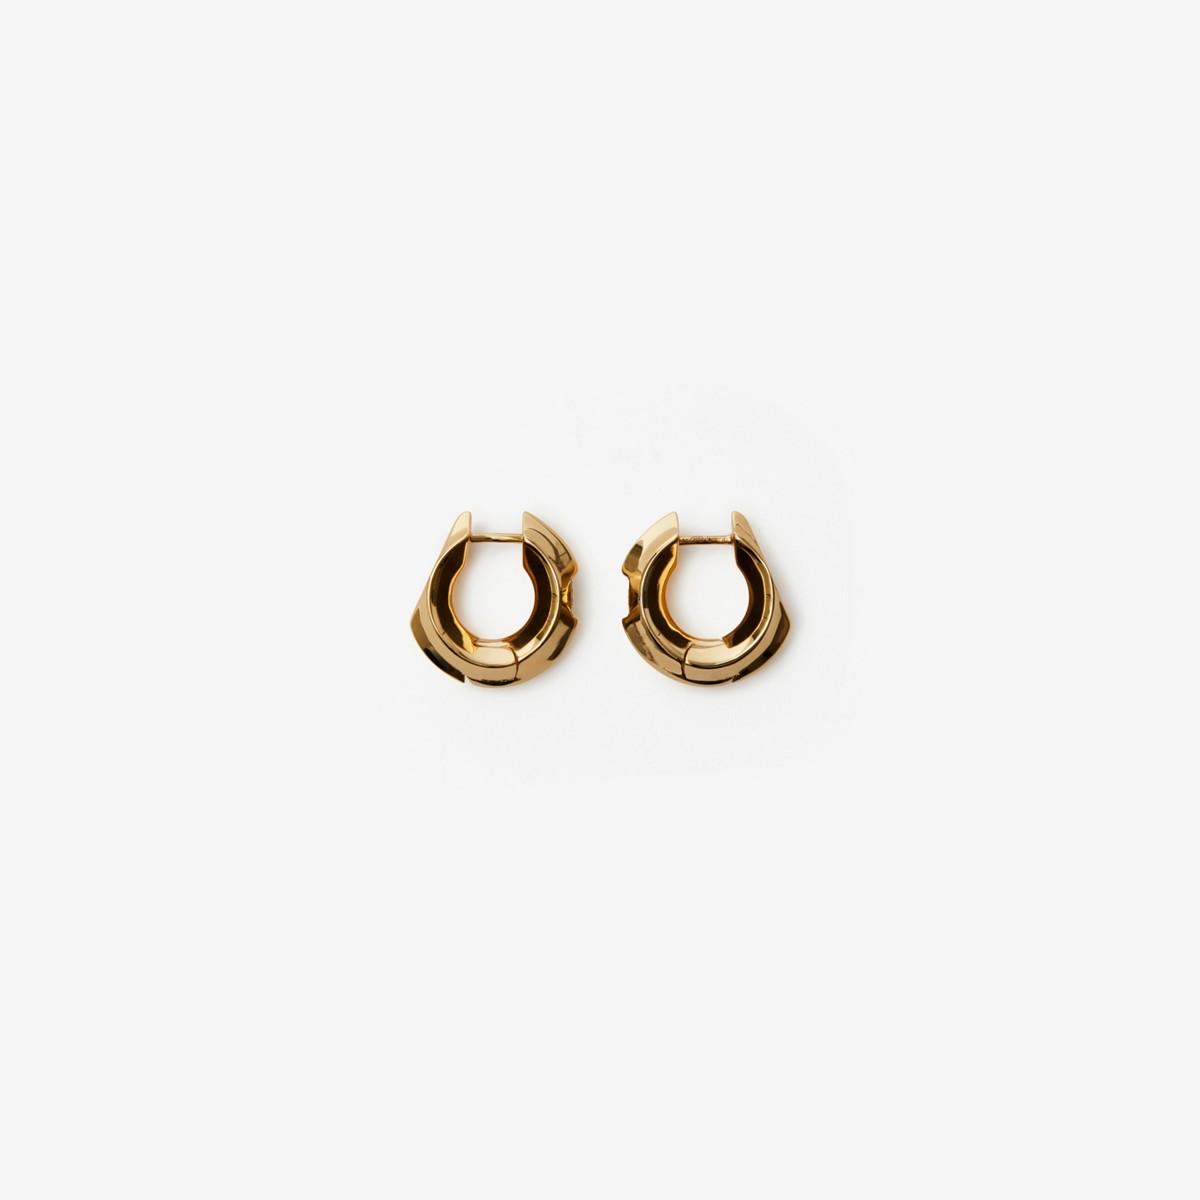 Burberry Gold-plated Hollow Earrings